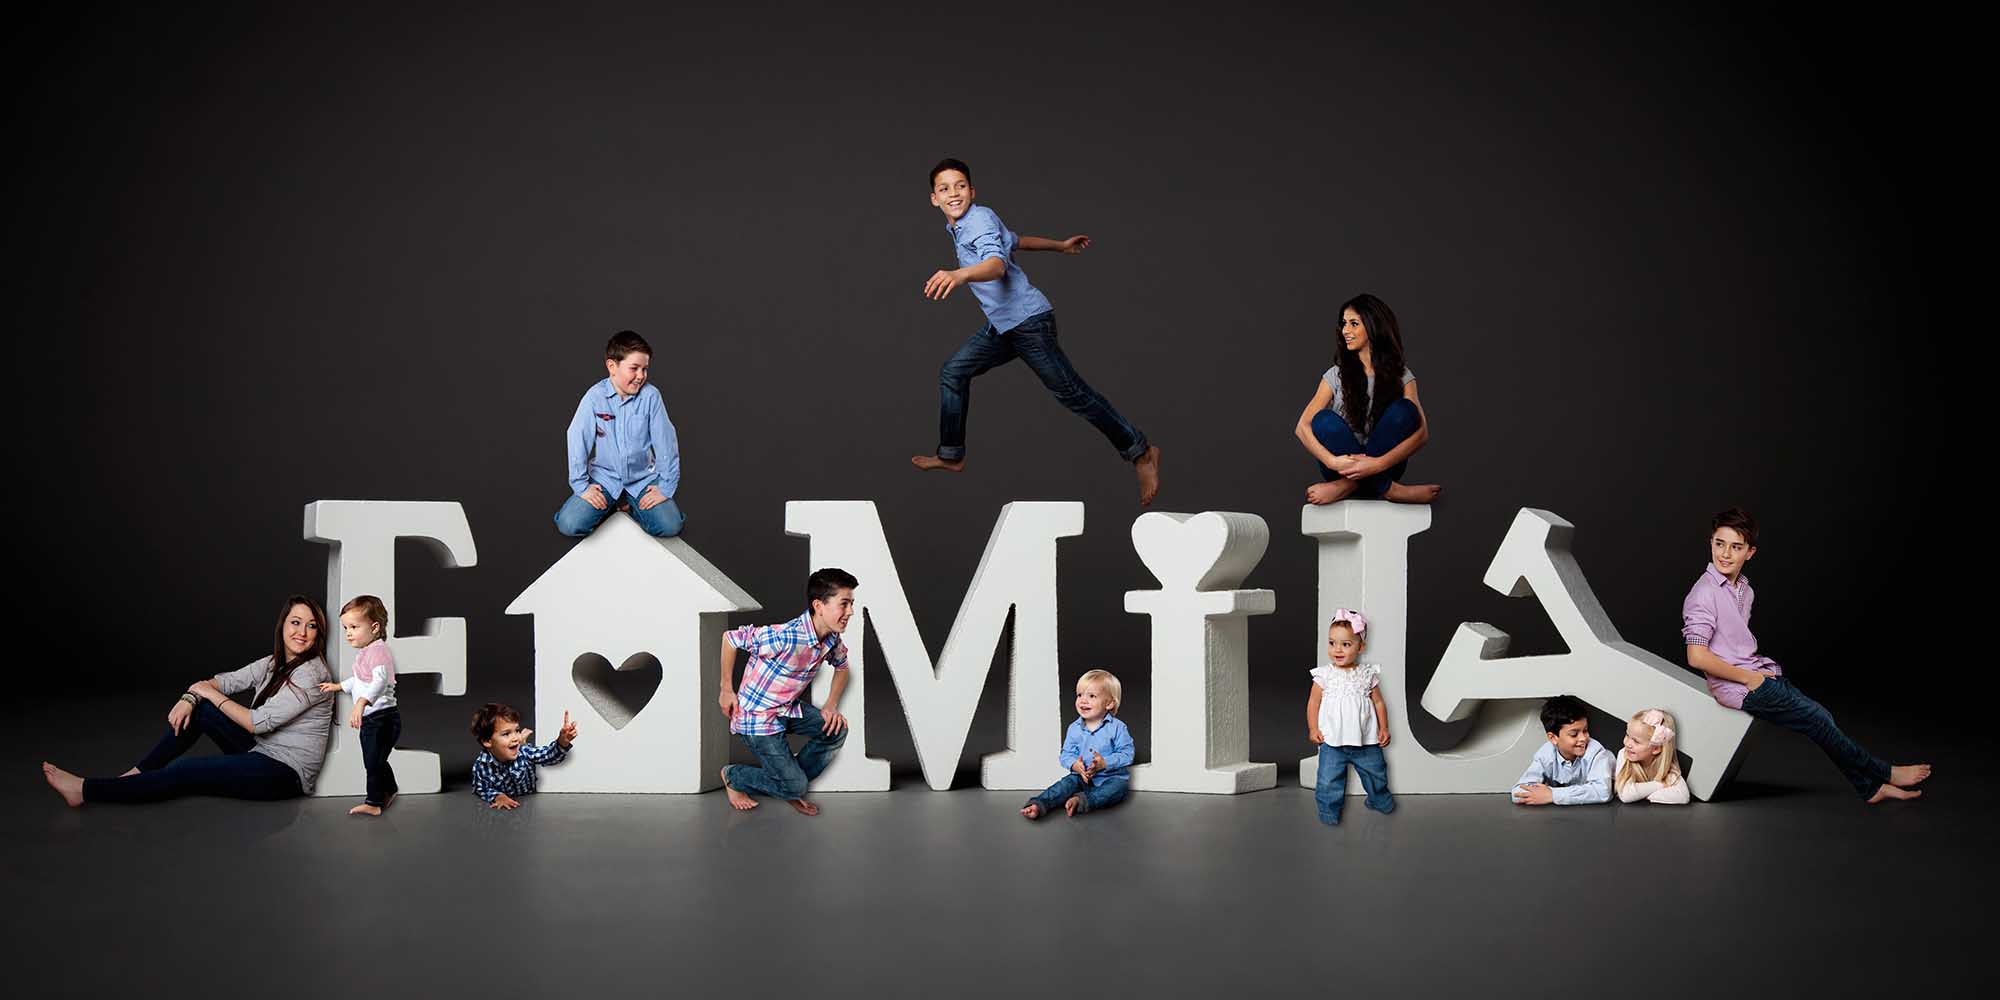 Creative Family Portrait with Children jumping and gathering around large letters that spell family.